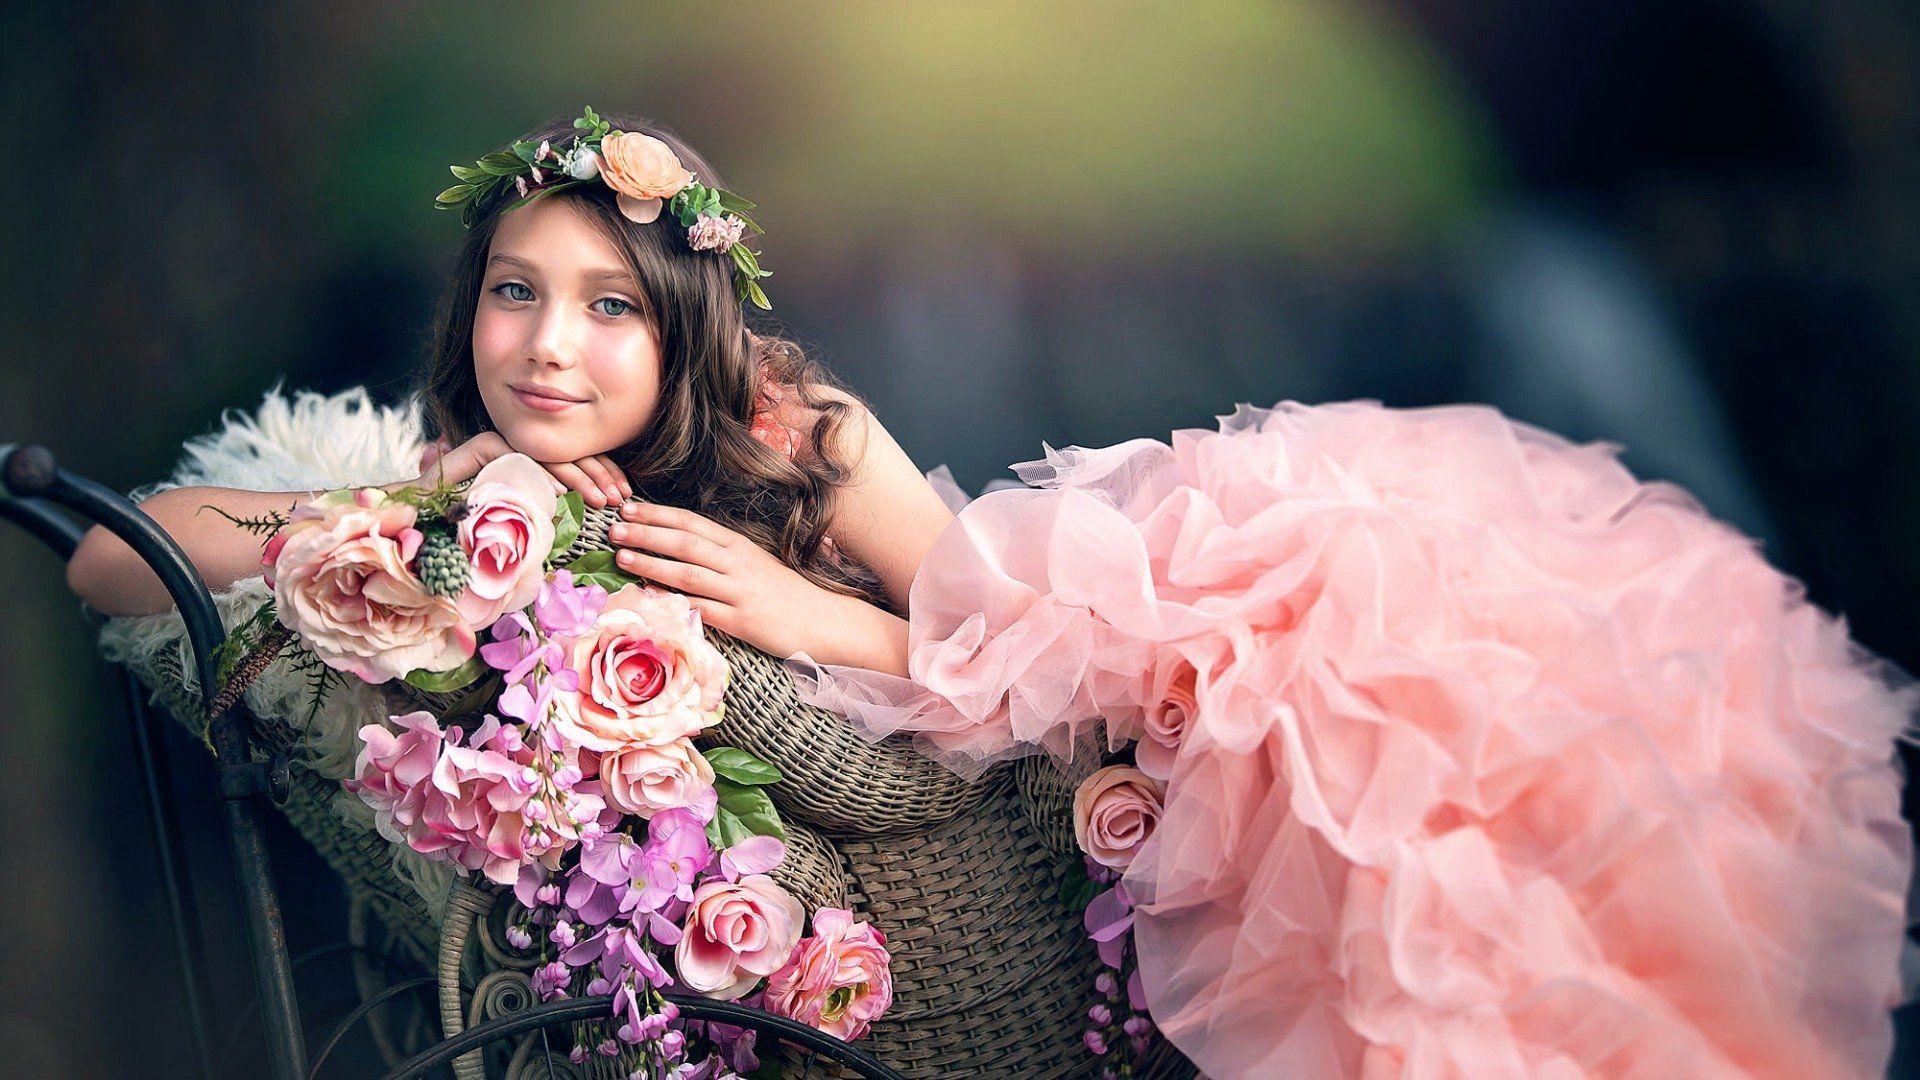 Pretty Girl with Flowers HD Wallpaper. Background Image